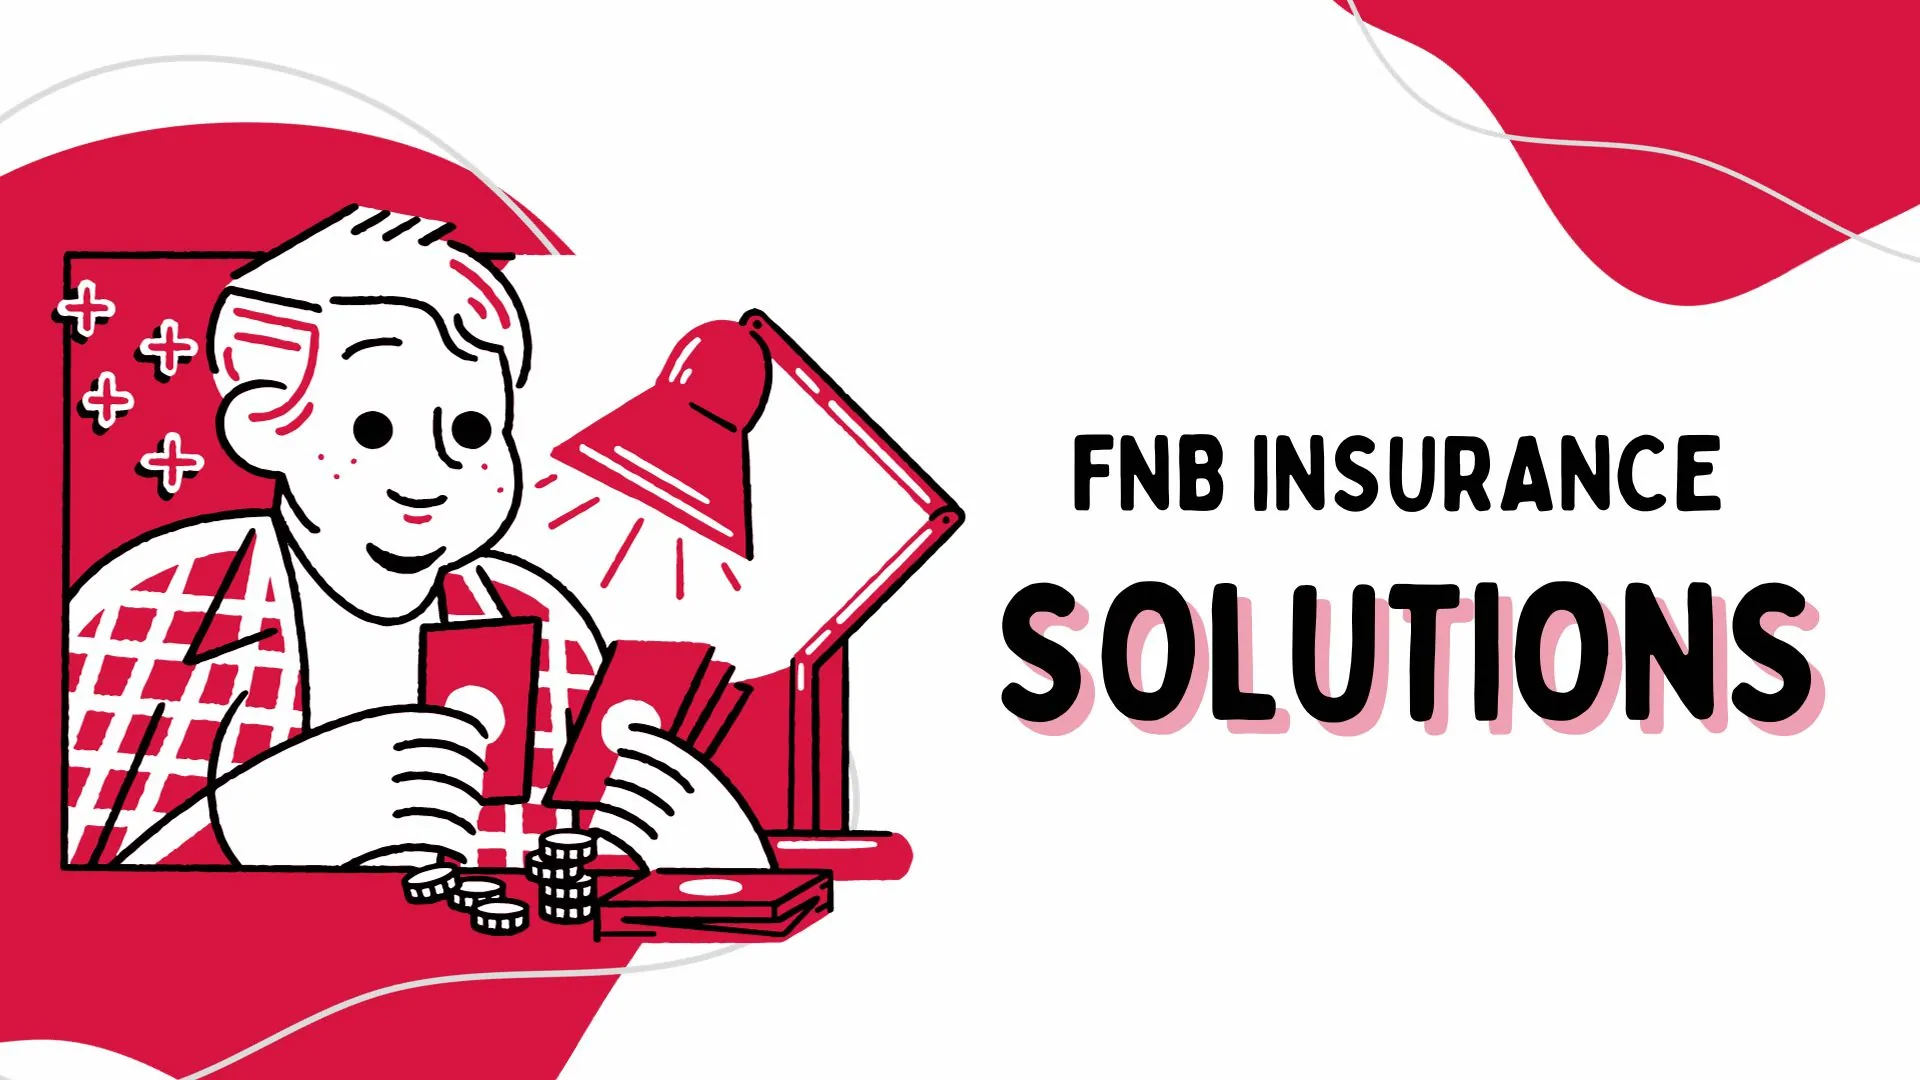 FNB Insurance Solutions Protect Your Assets